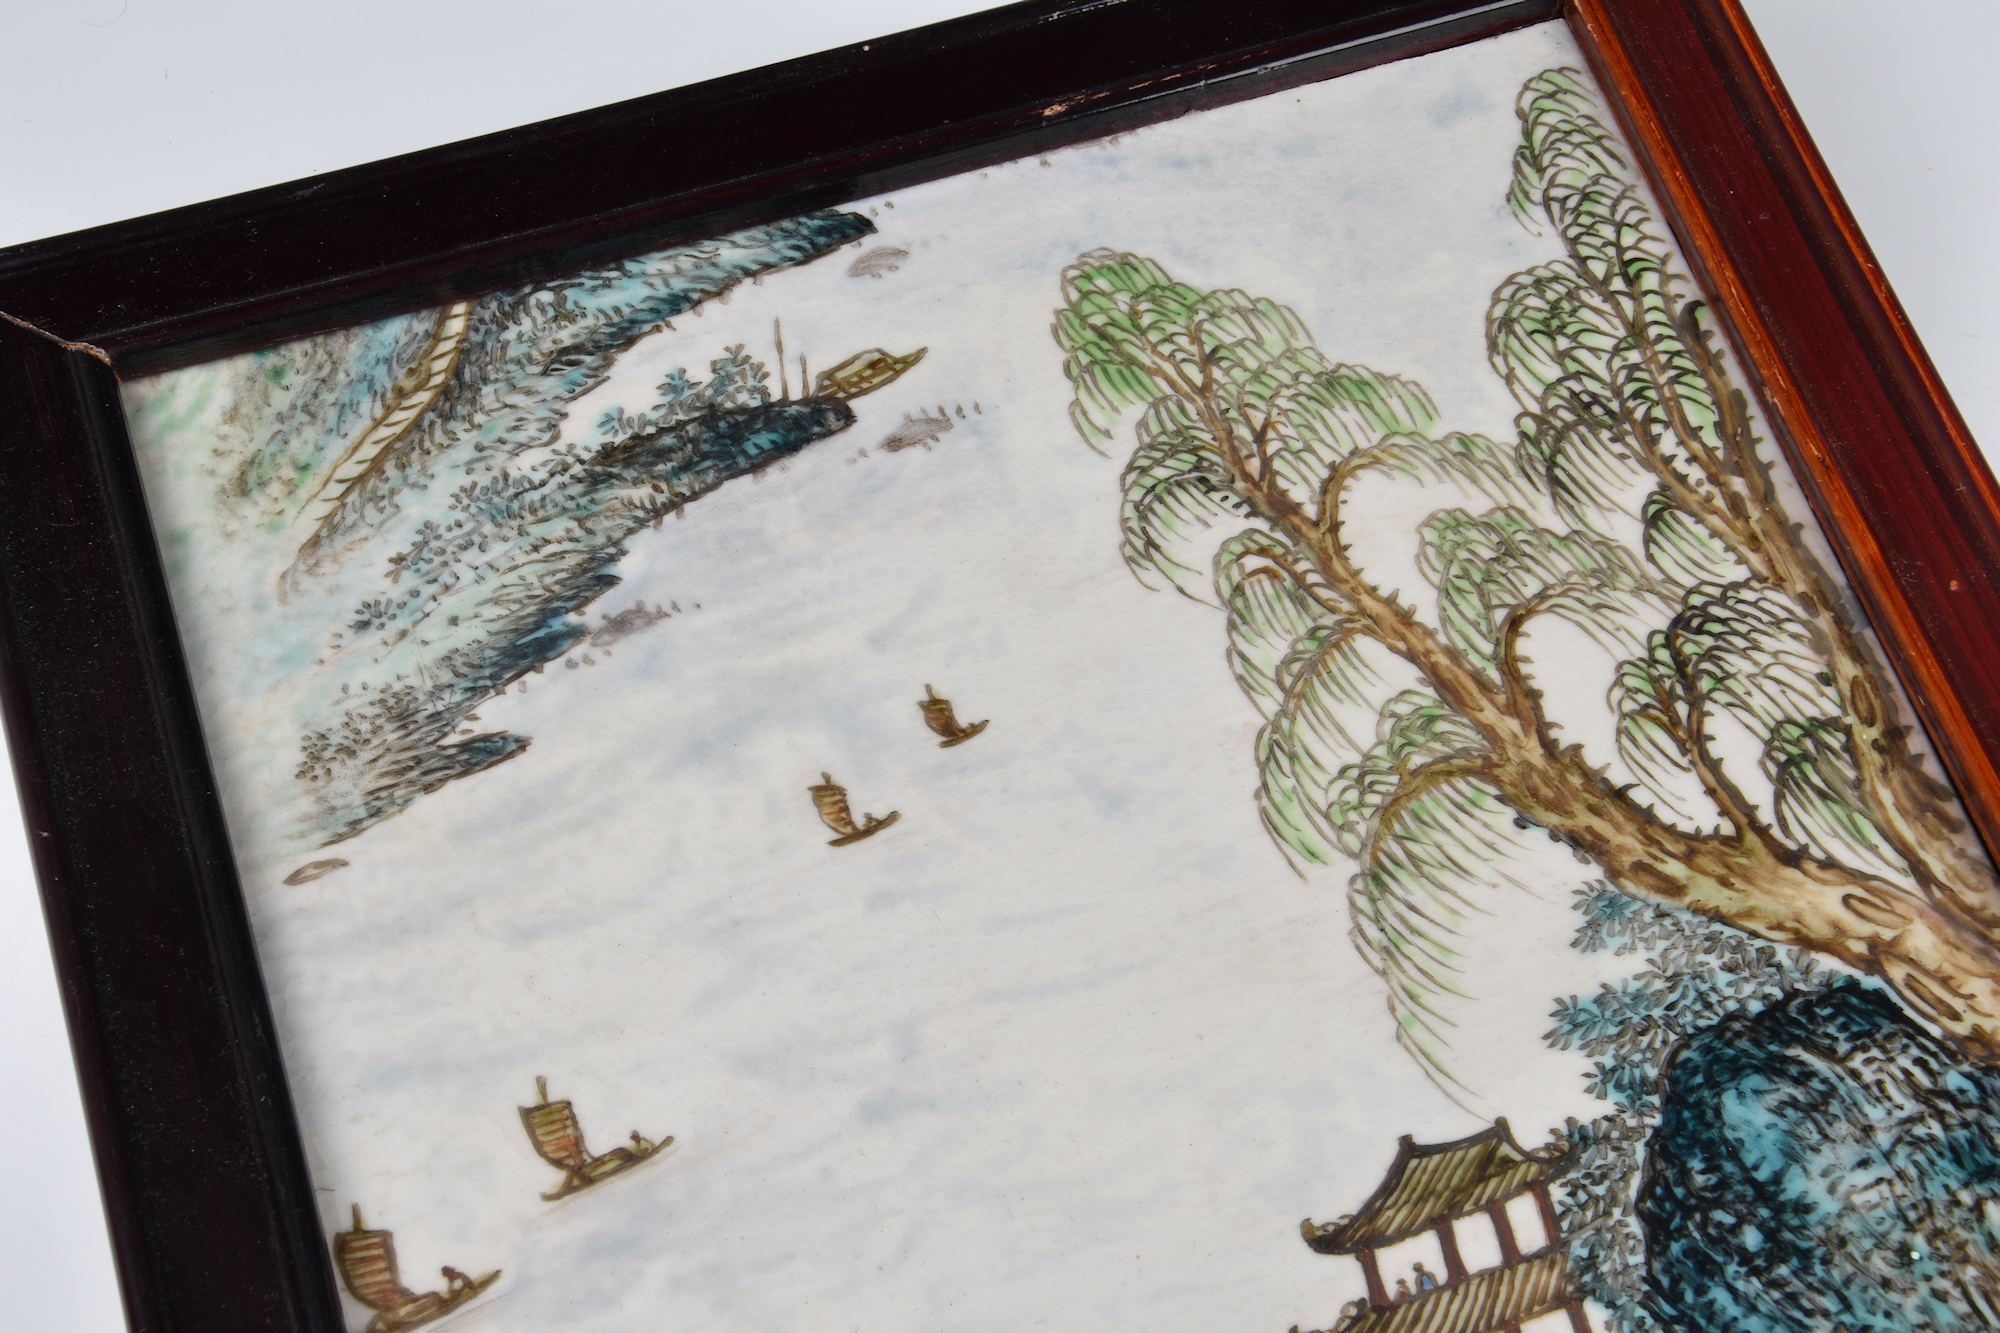 Two Chinese porcelain plaques, depicting boats in lake landscapes, late 20th century, in wooden - Image 6 of 11